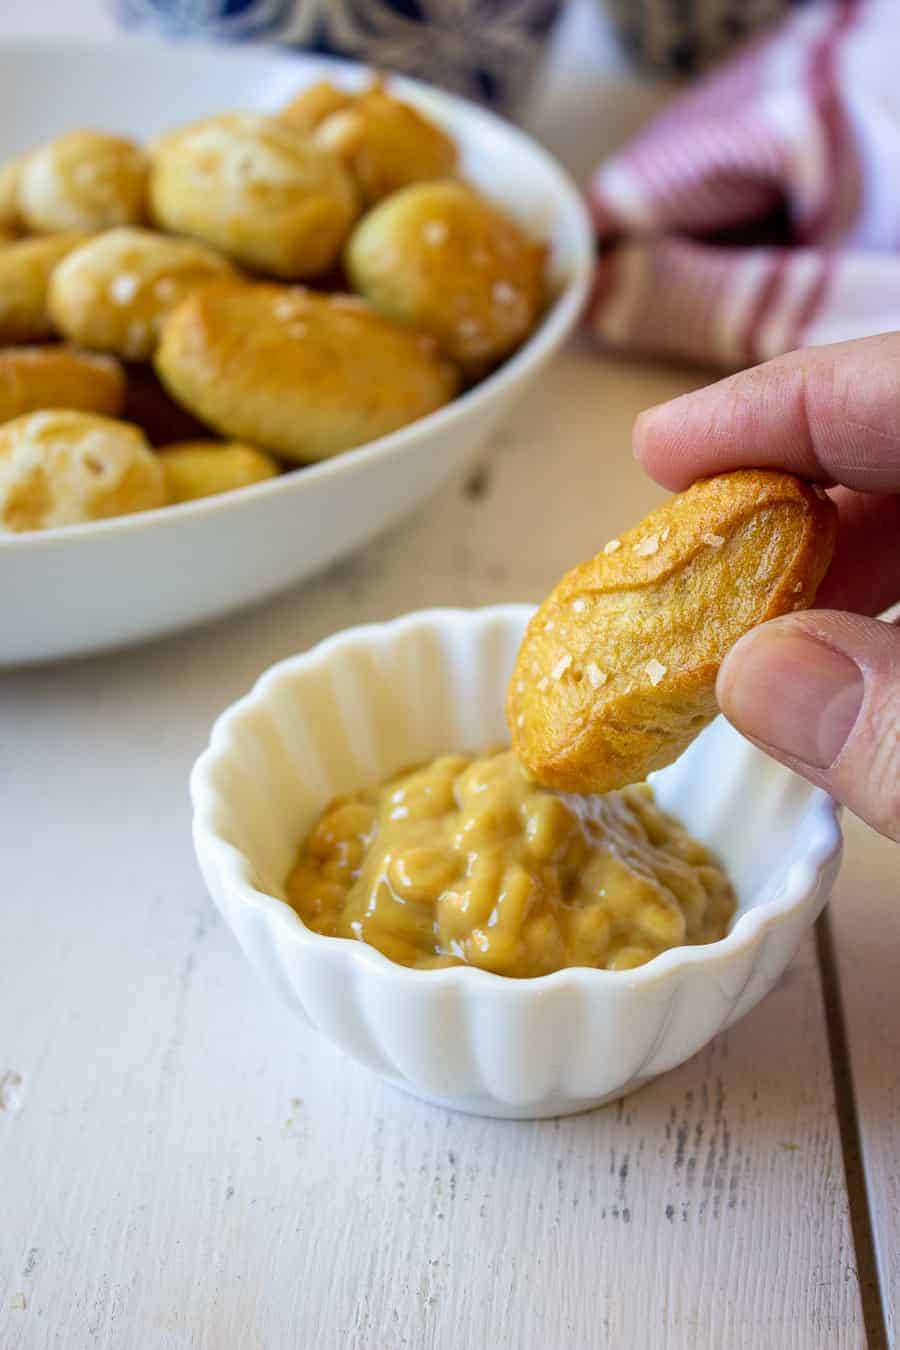 A small pretzel dipped into a bowl of mustard.